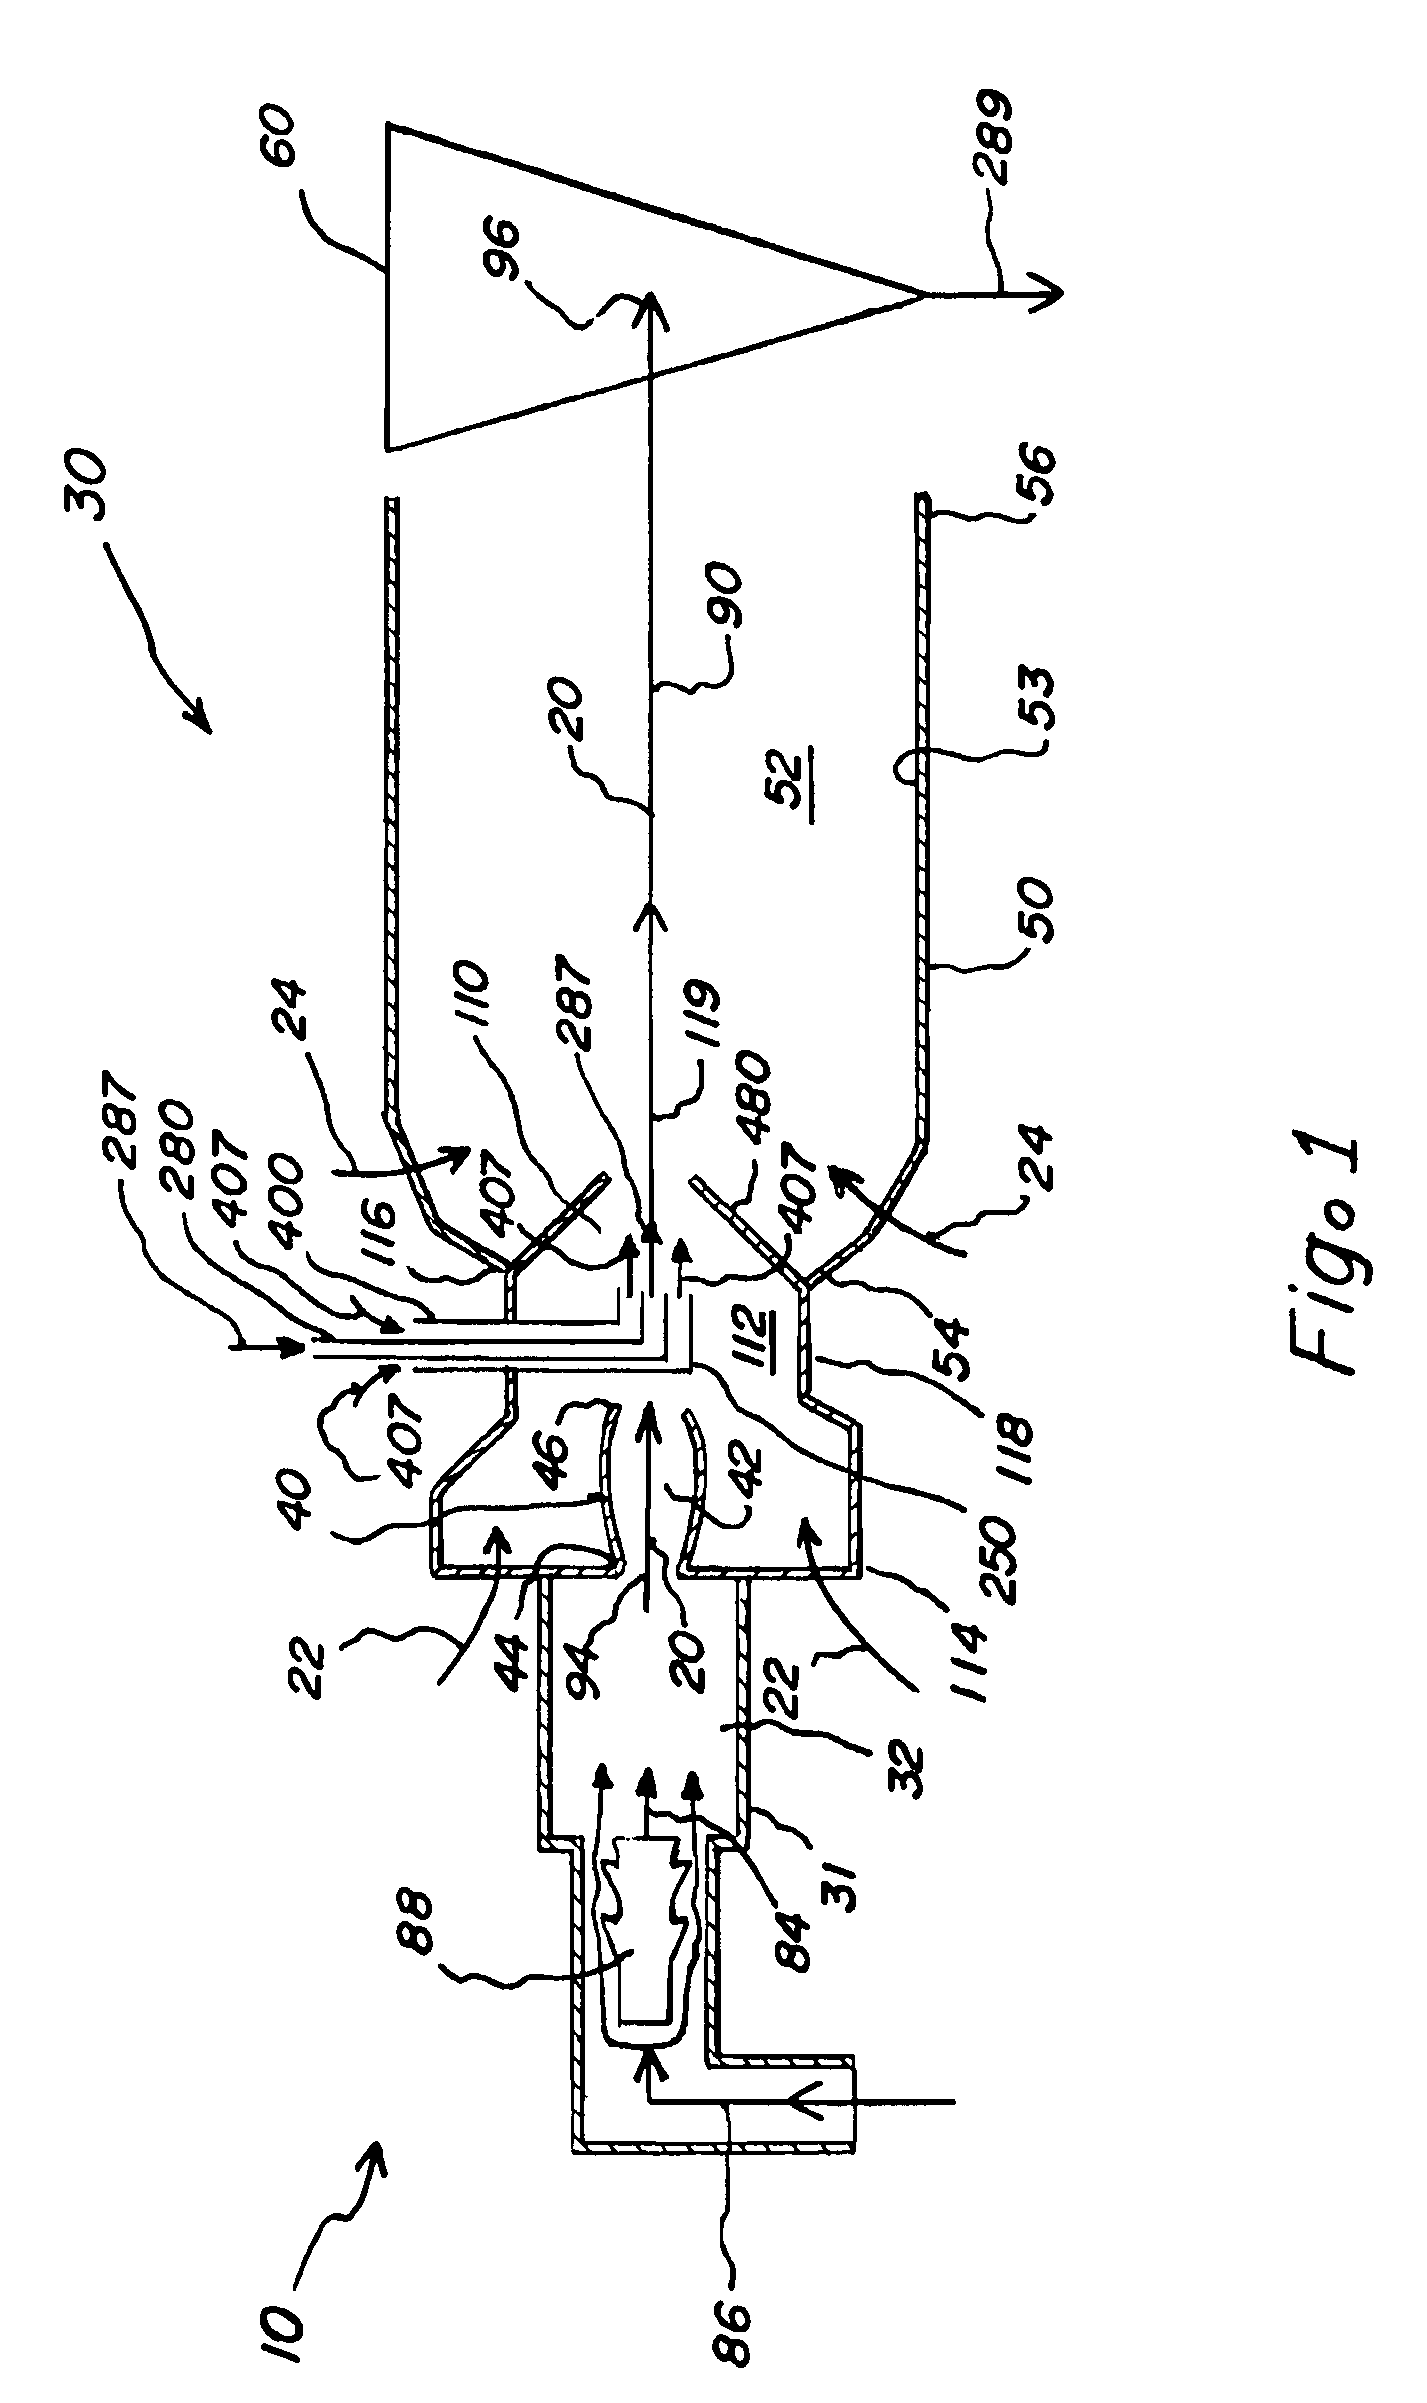 Nozzle apparatus for material dispersion in a dryer and methods for drying materials